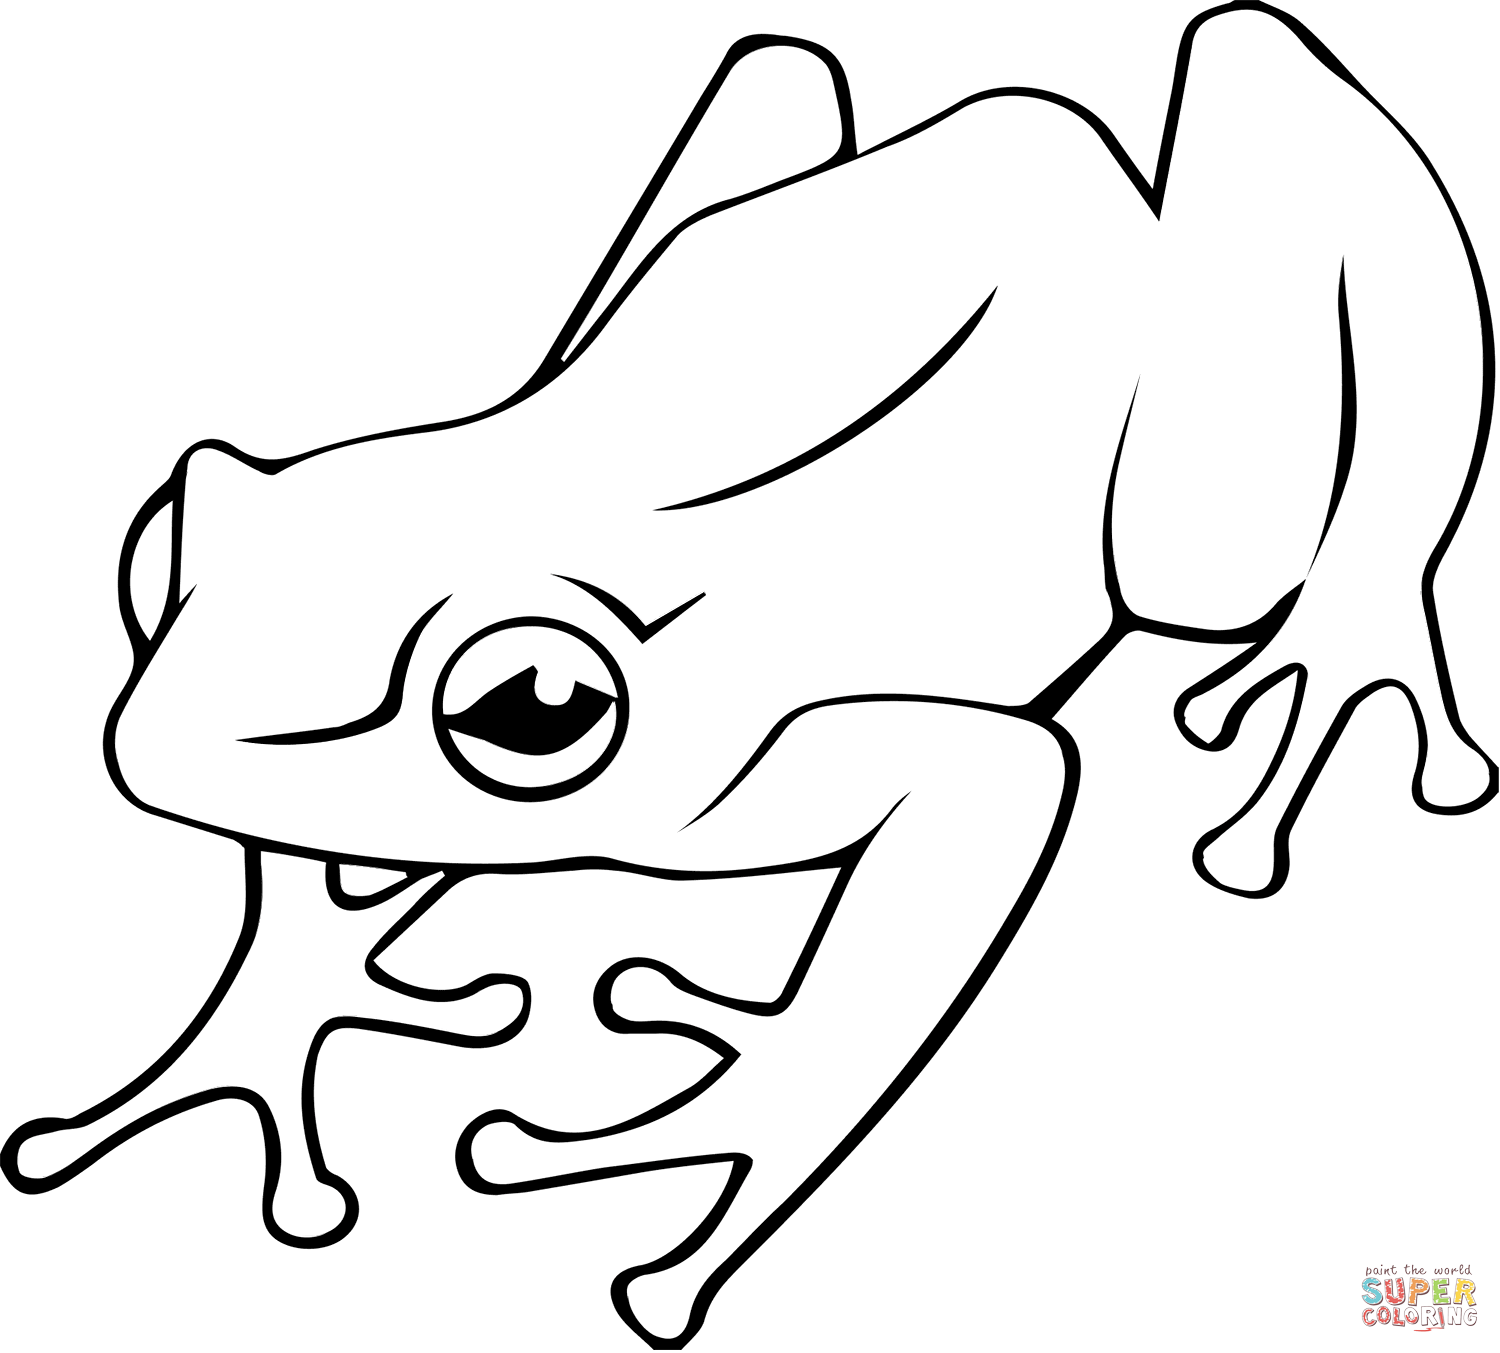 Poison Dart Frog coloring page | Free Printable Coloring Pages